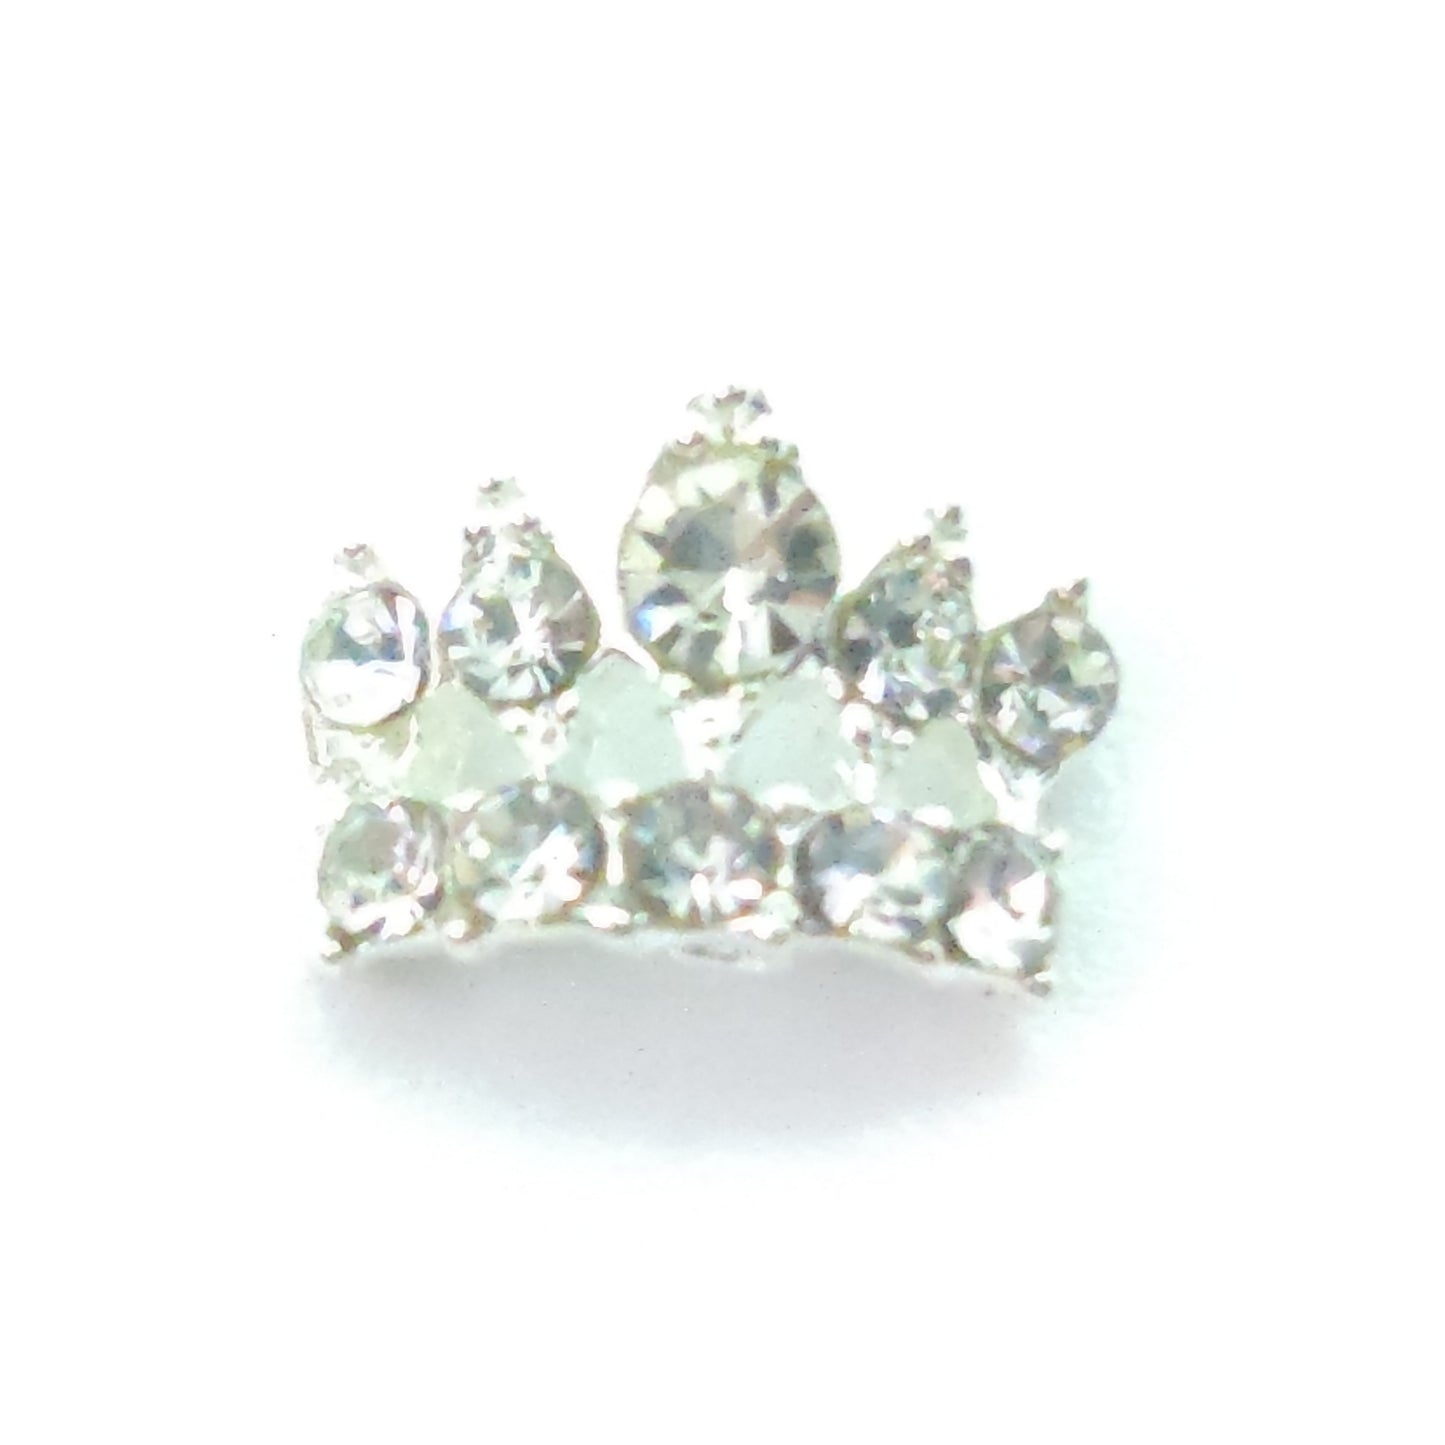 2 Pack 3d Crowns - Gold Or Silver